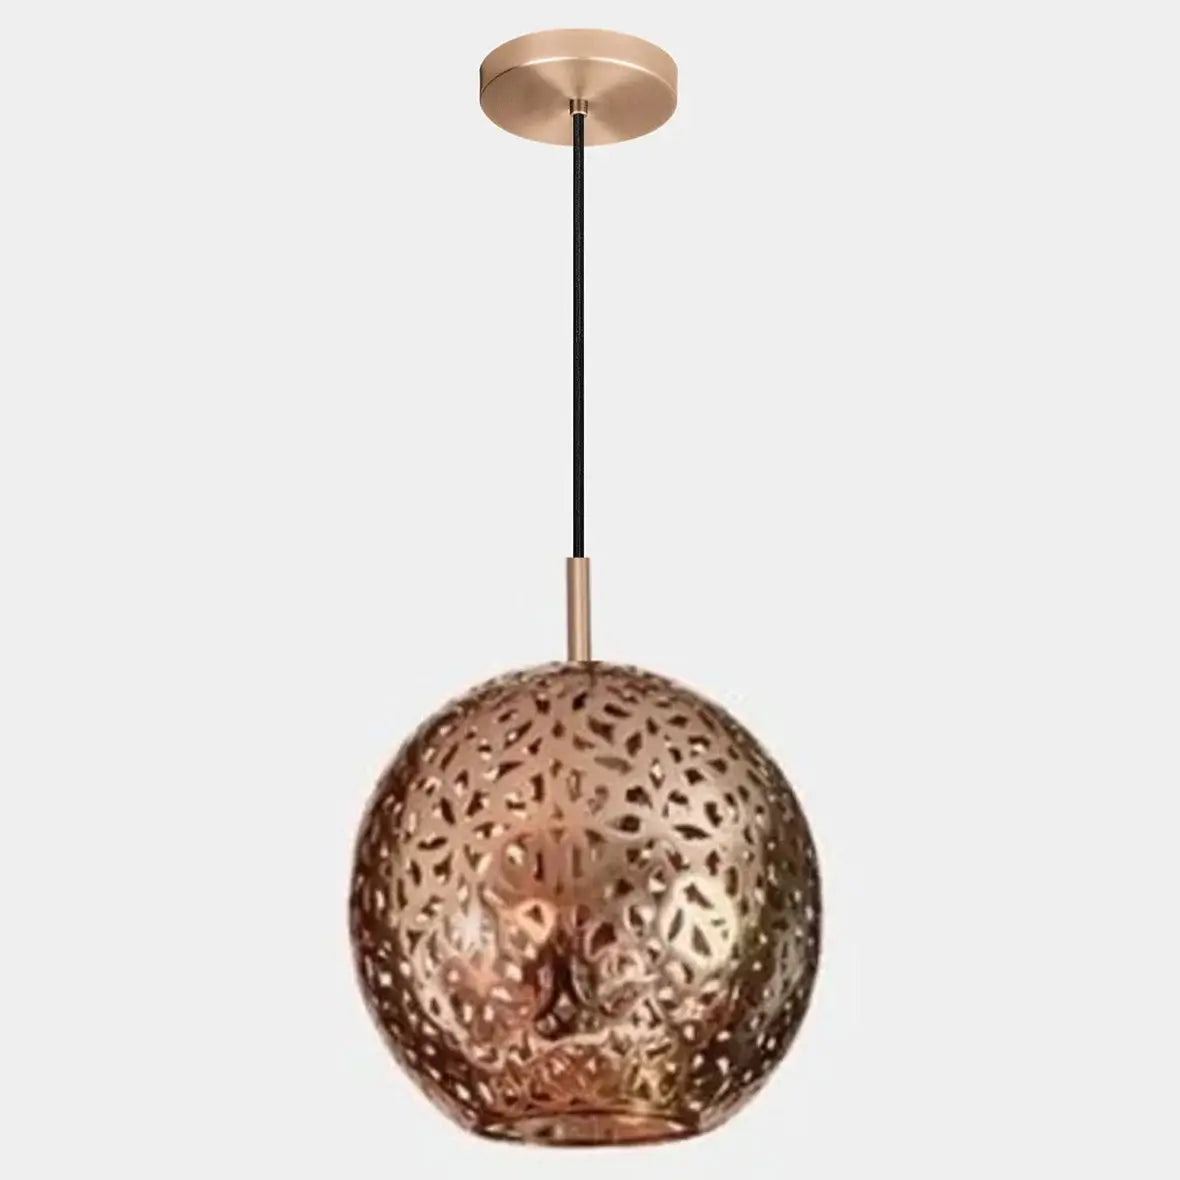 Dounia home Pendant light in Polished copper  made of Metal, Model: Riad  single